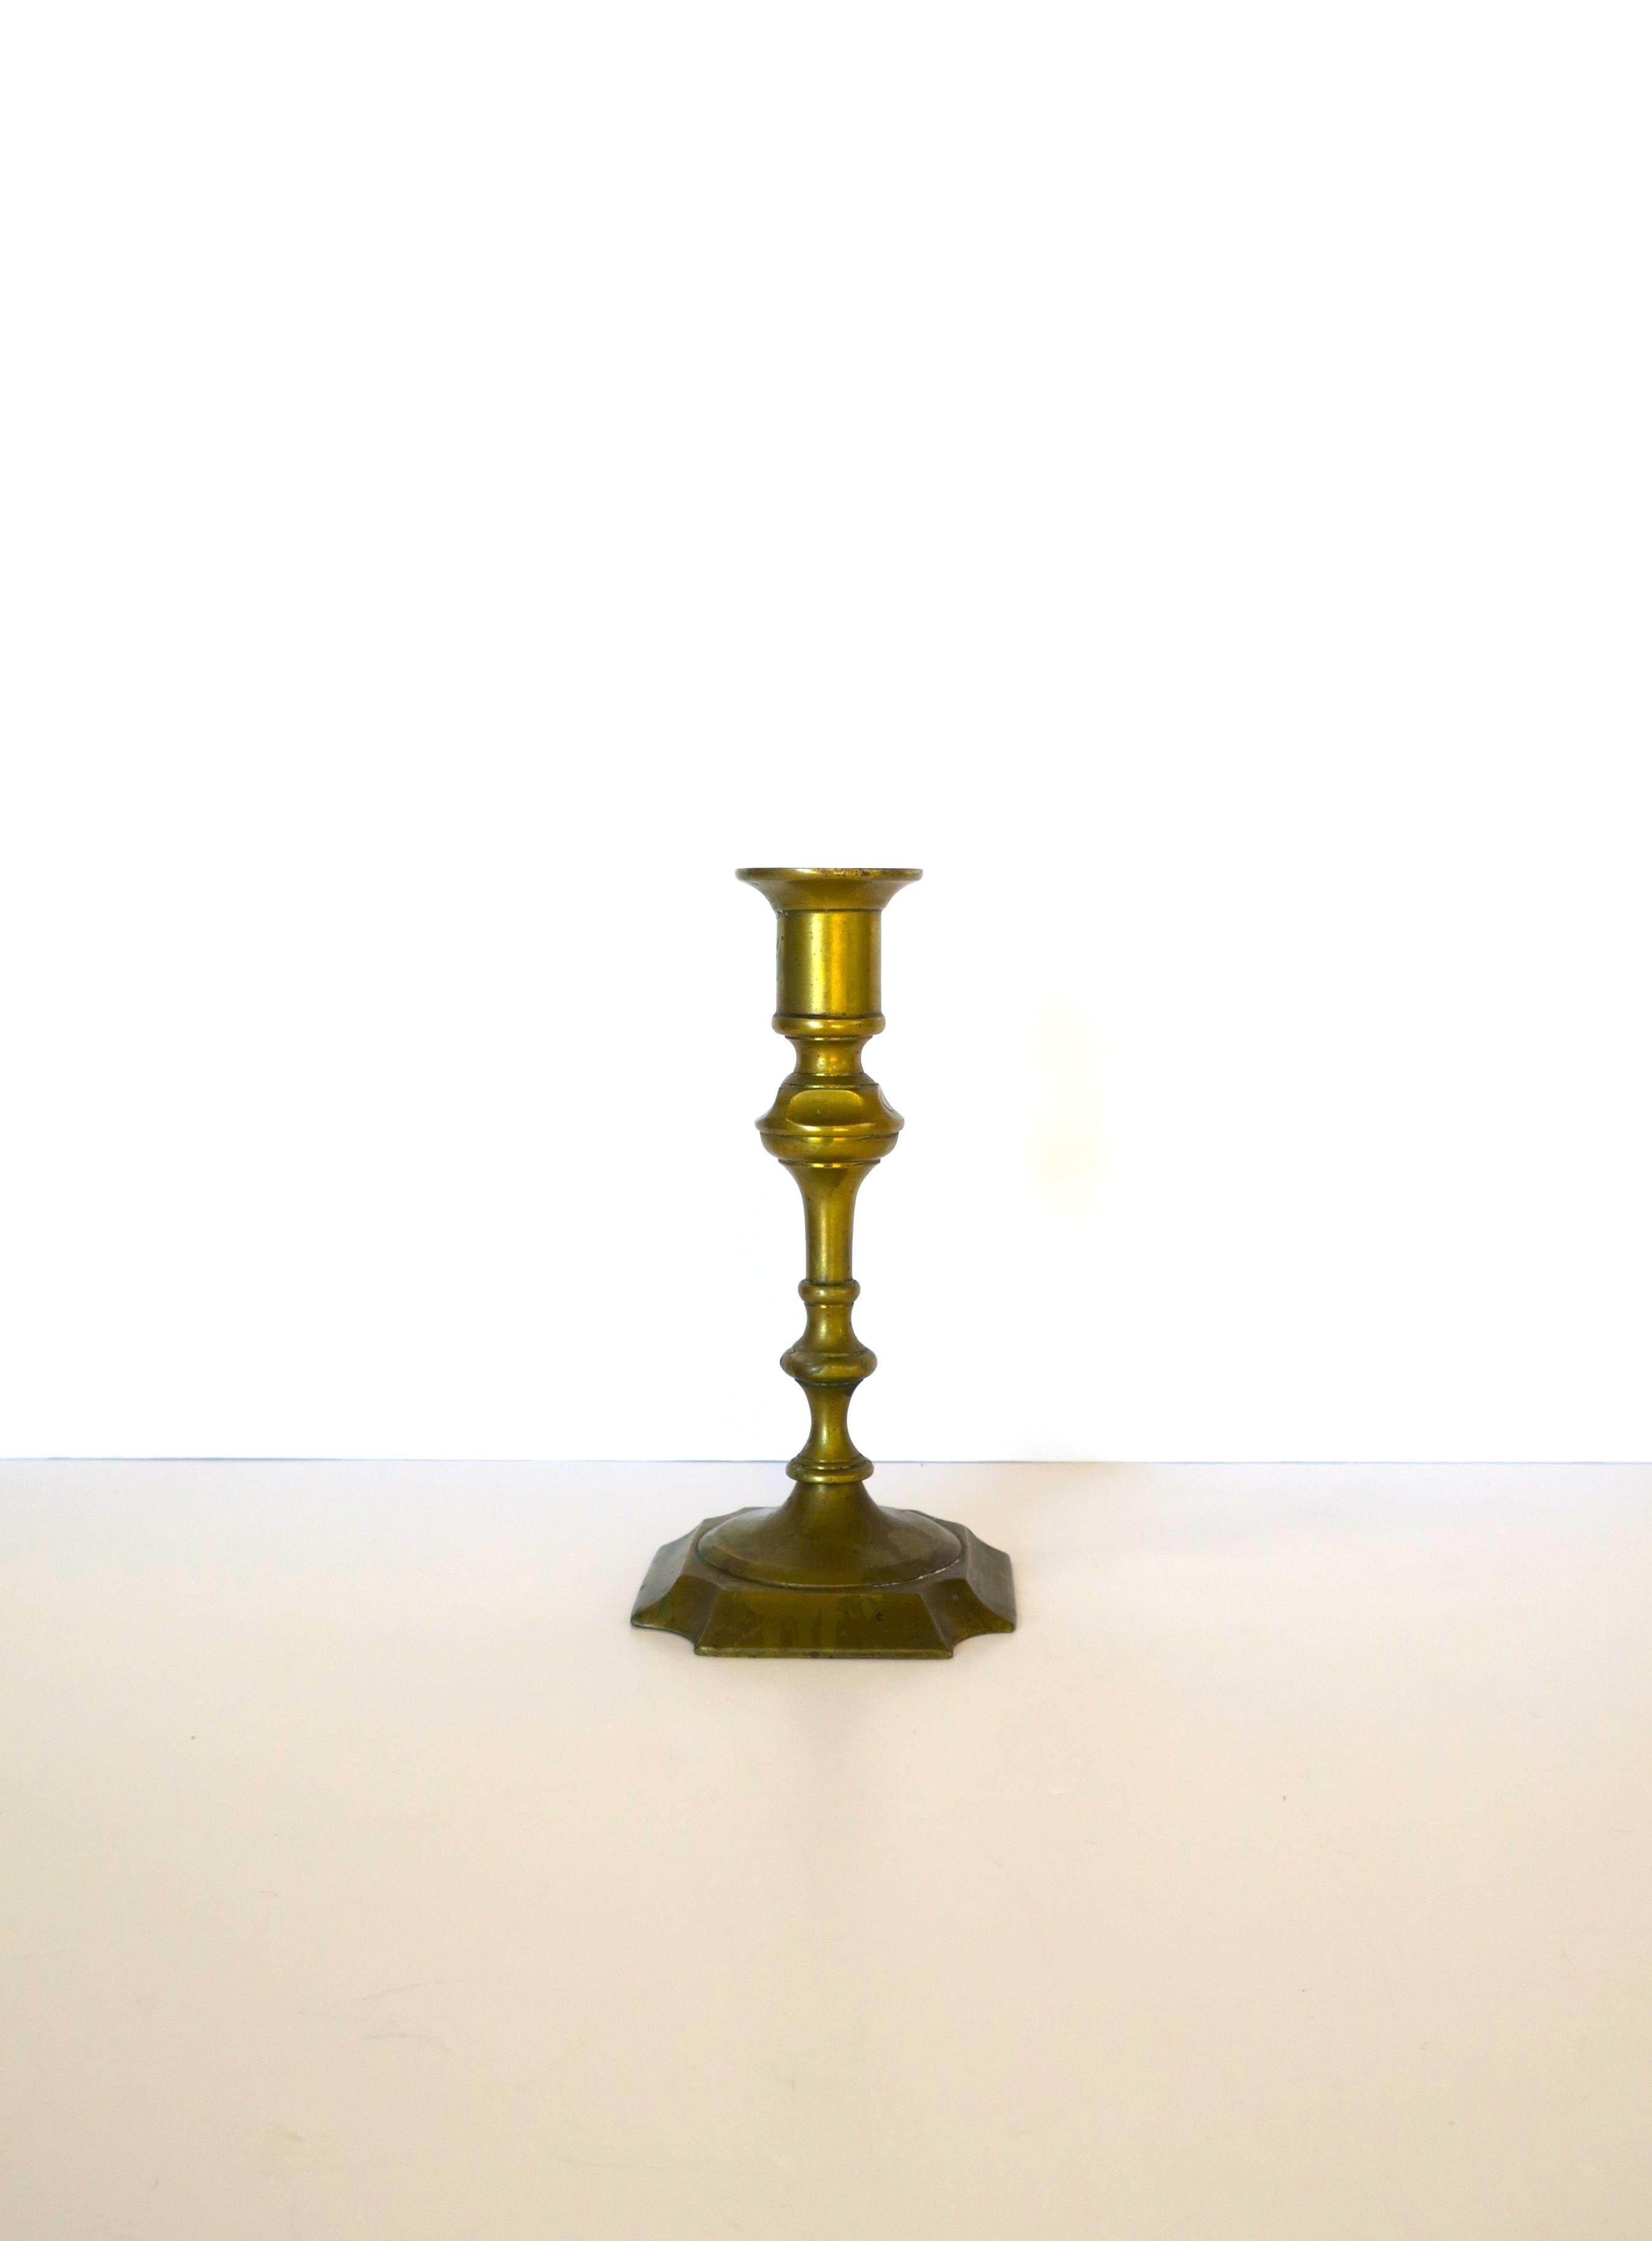 An authentic English brass candlestick holder, circa 18th-19th century, England. Candlestick is solid brass. Piece is marked on bottom 'Made in England', as shown in last two images. A beautiful candlestick holder with age patina intact